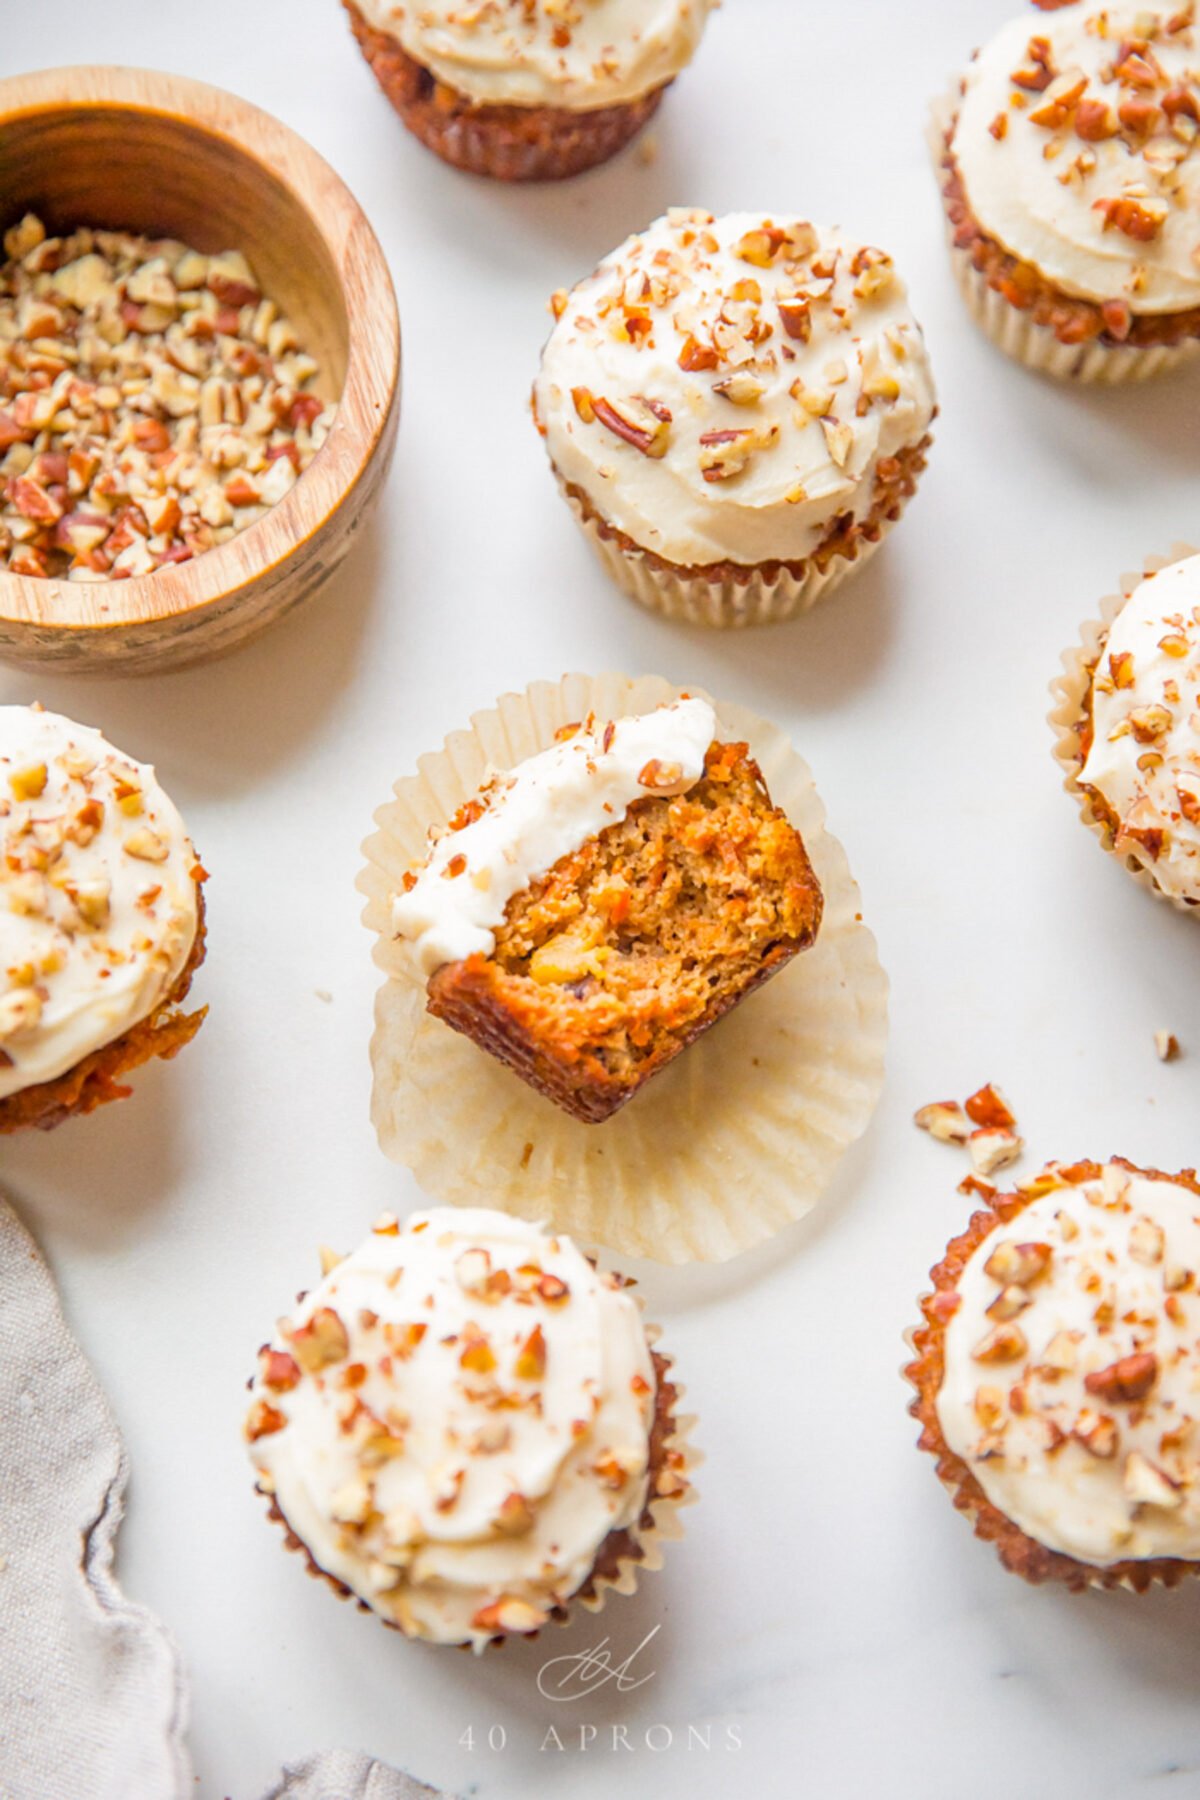 Top-down view of frosted and unfrosted paleo carrot cake cupcakes.